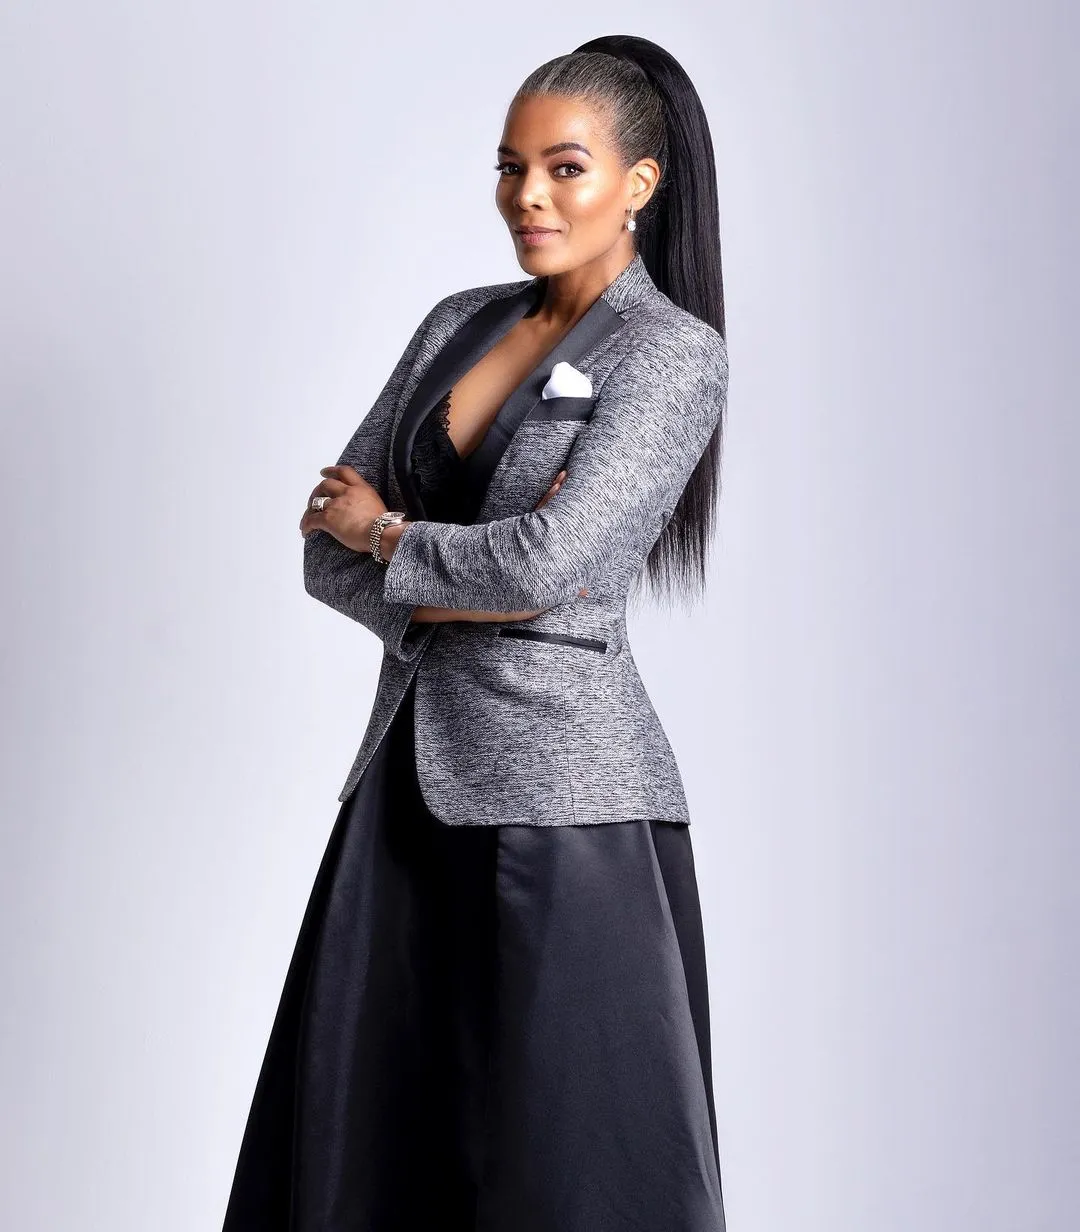 Connie Ferguson Pens A Sweet Birthday Note To Alicia As She Turns 21